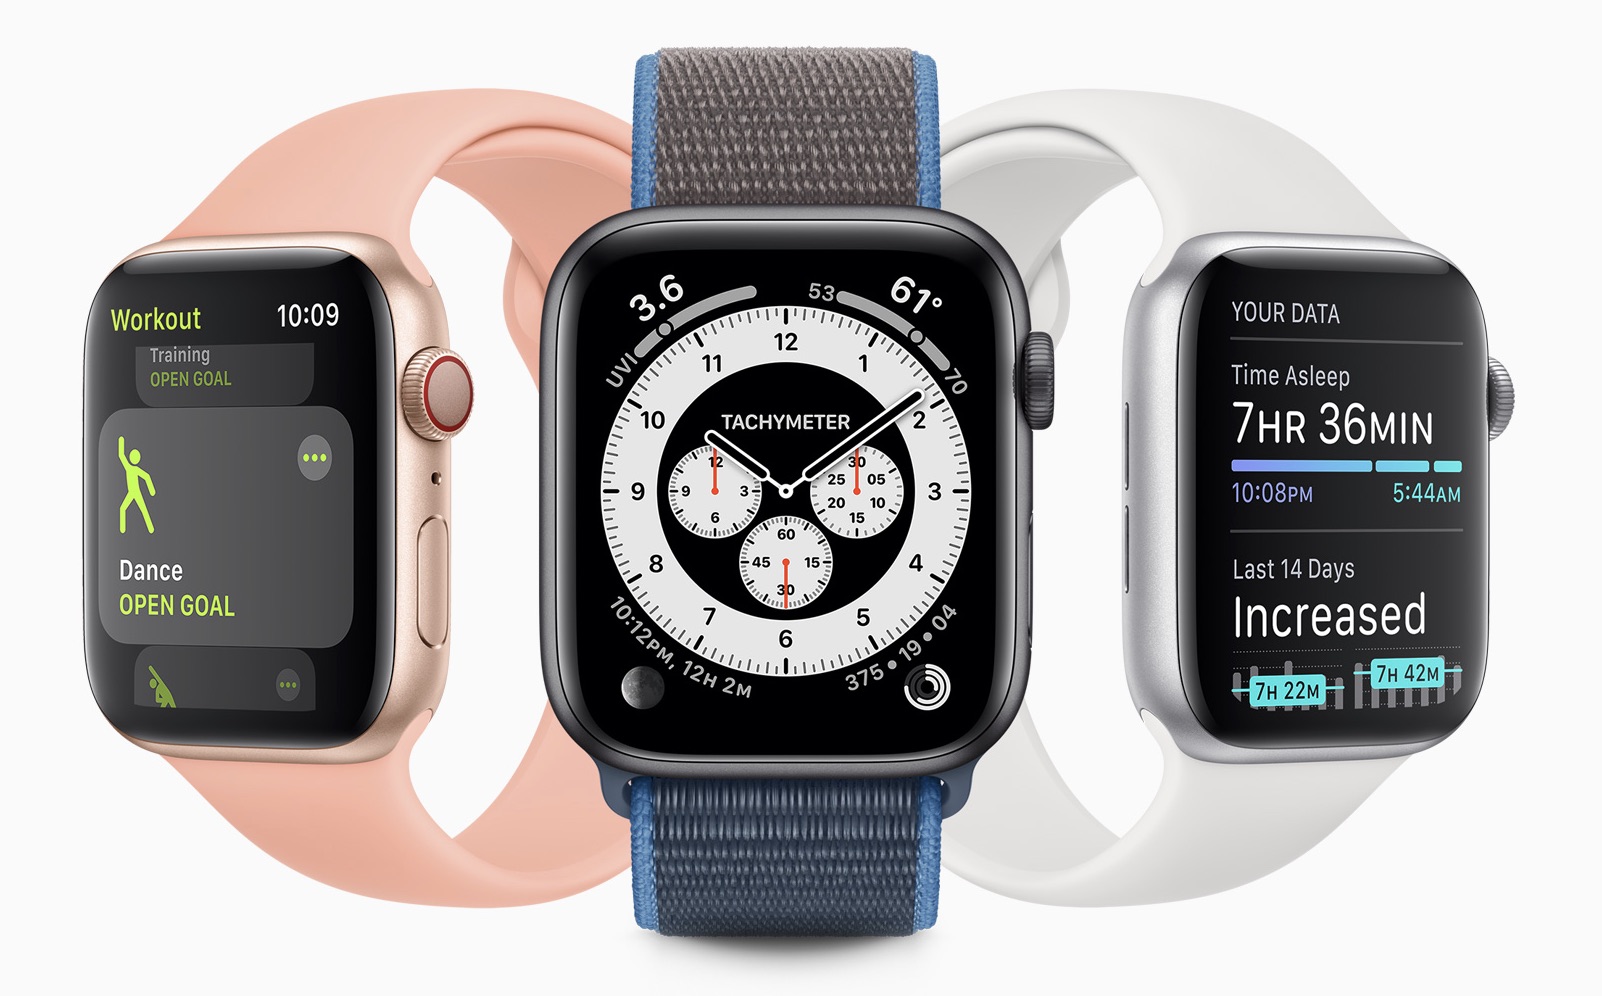 Watchos 7 Only Compatible With Apple Watch Series 3 And Later